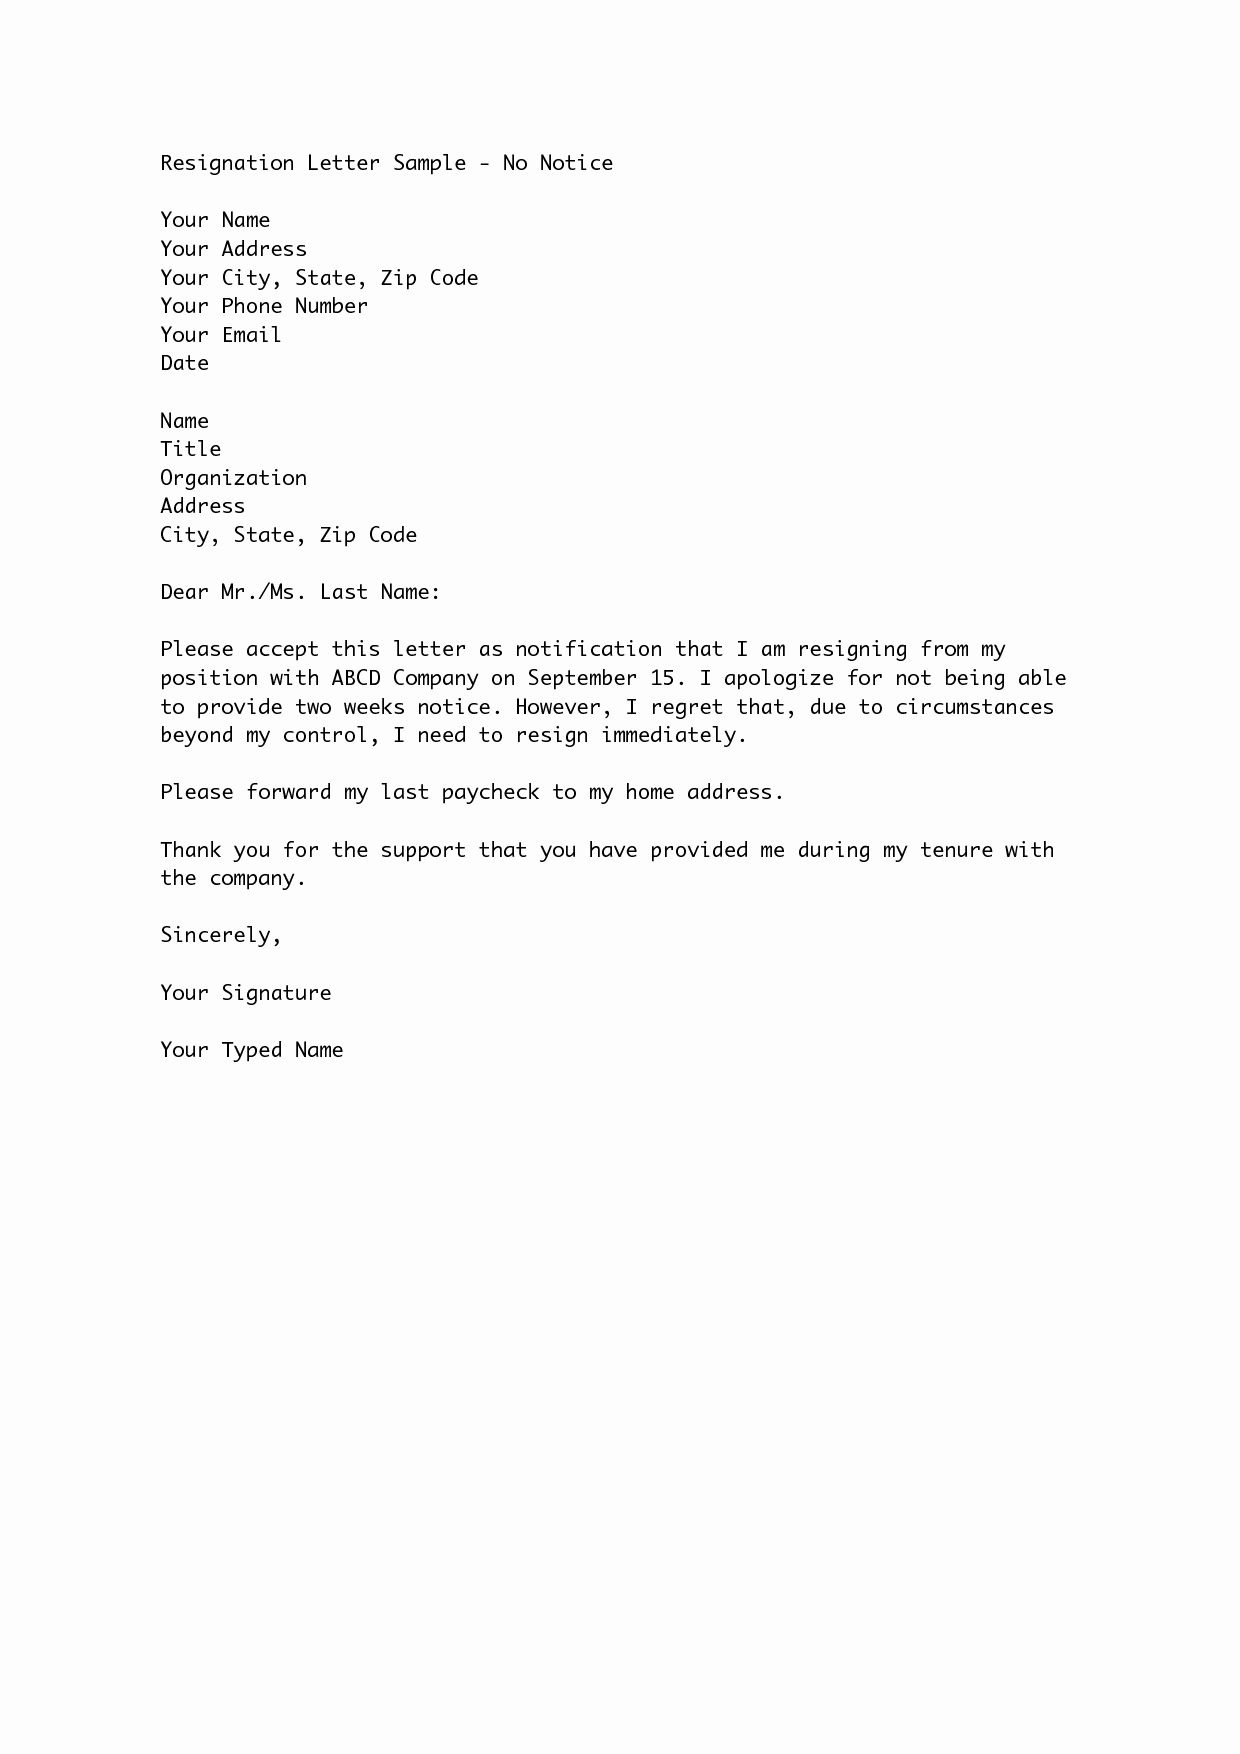 2 Week Resignation Letter Template Best Of Two Weeks’ Notice Resignation Letter Samples